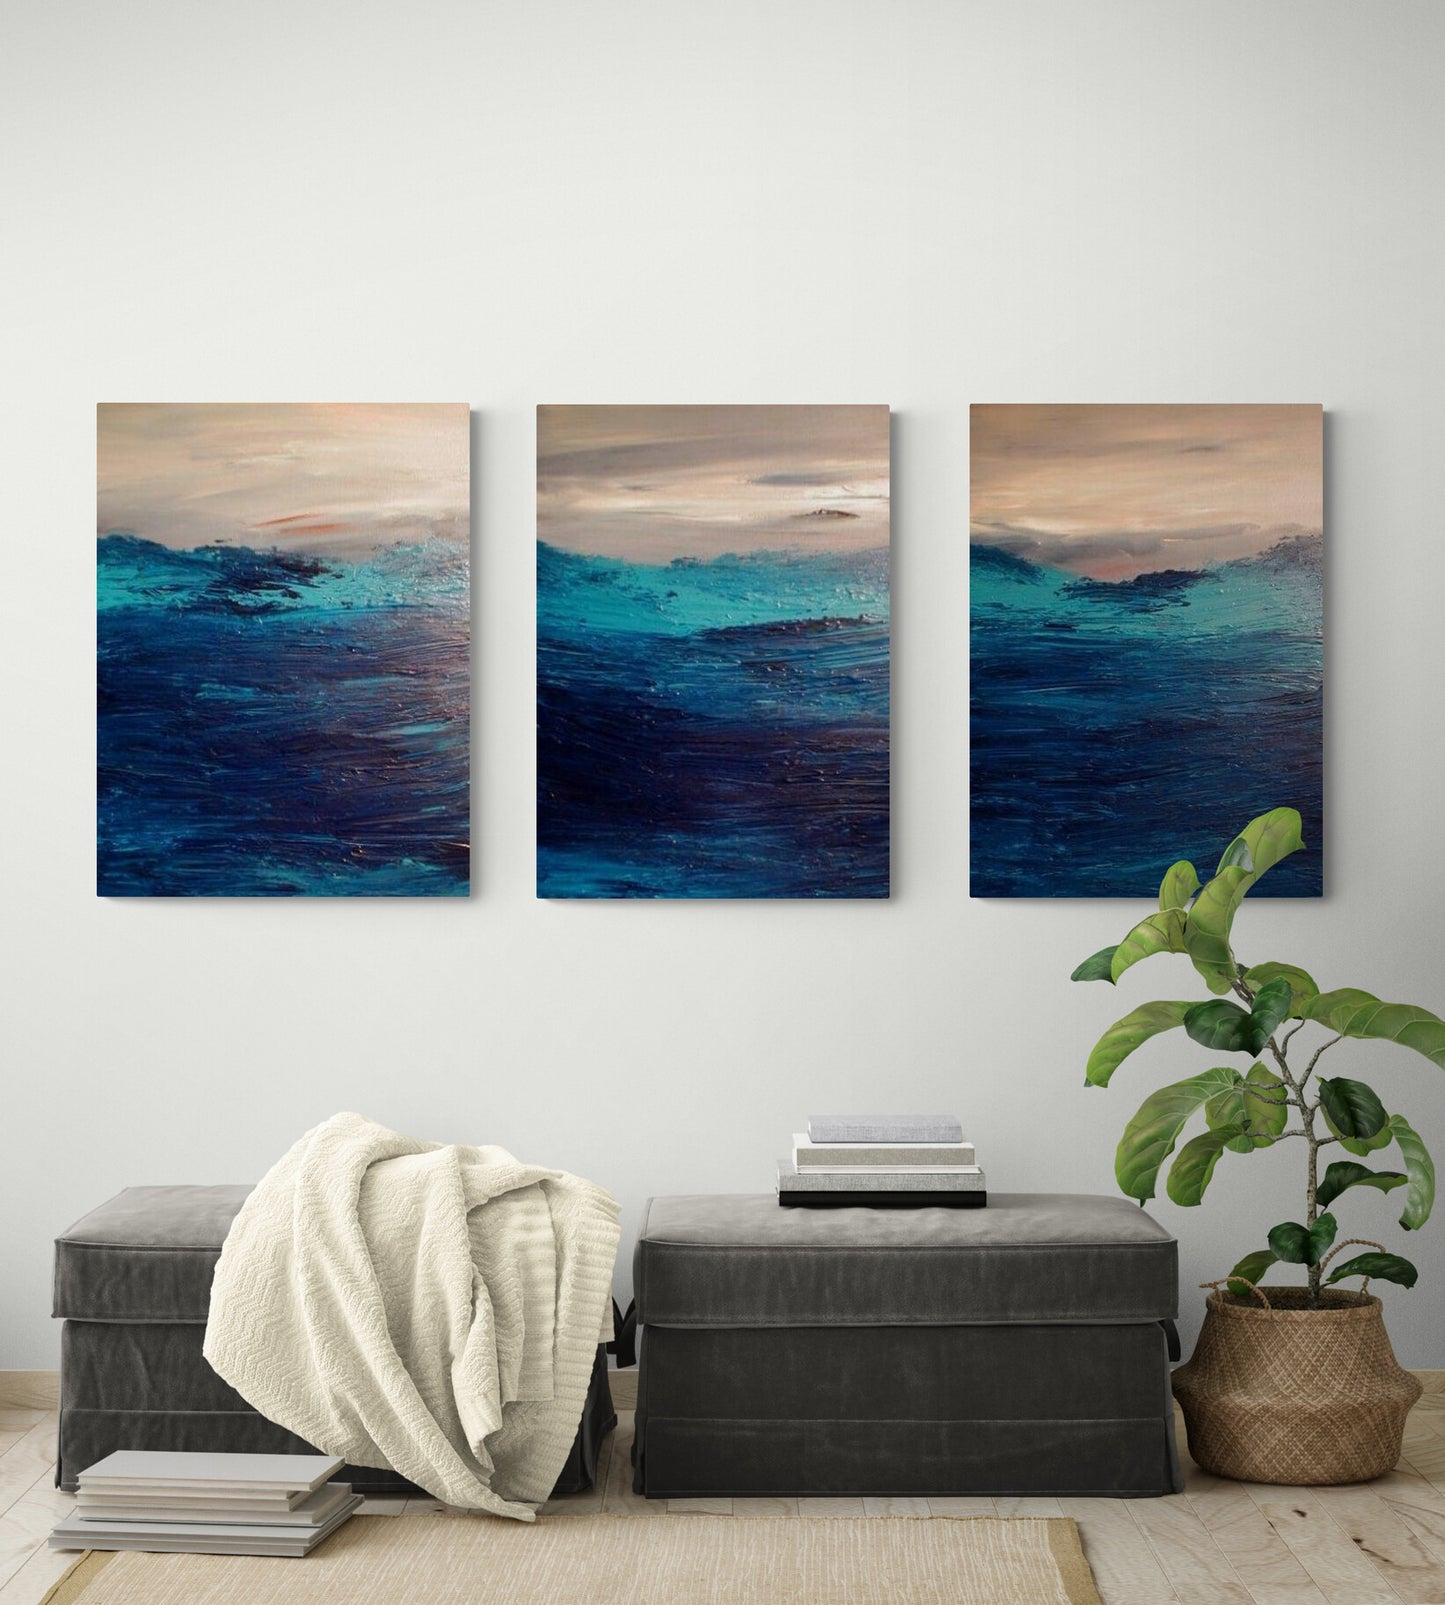 Large Seascape Triptych, Set of 3 Original Modern Paintings, Ocean Painting Abstract, Ready to Hang, Living Room Art, Hand Painted Art